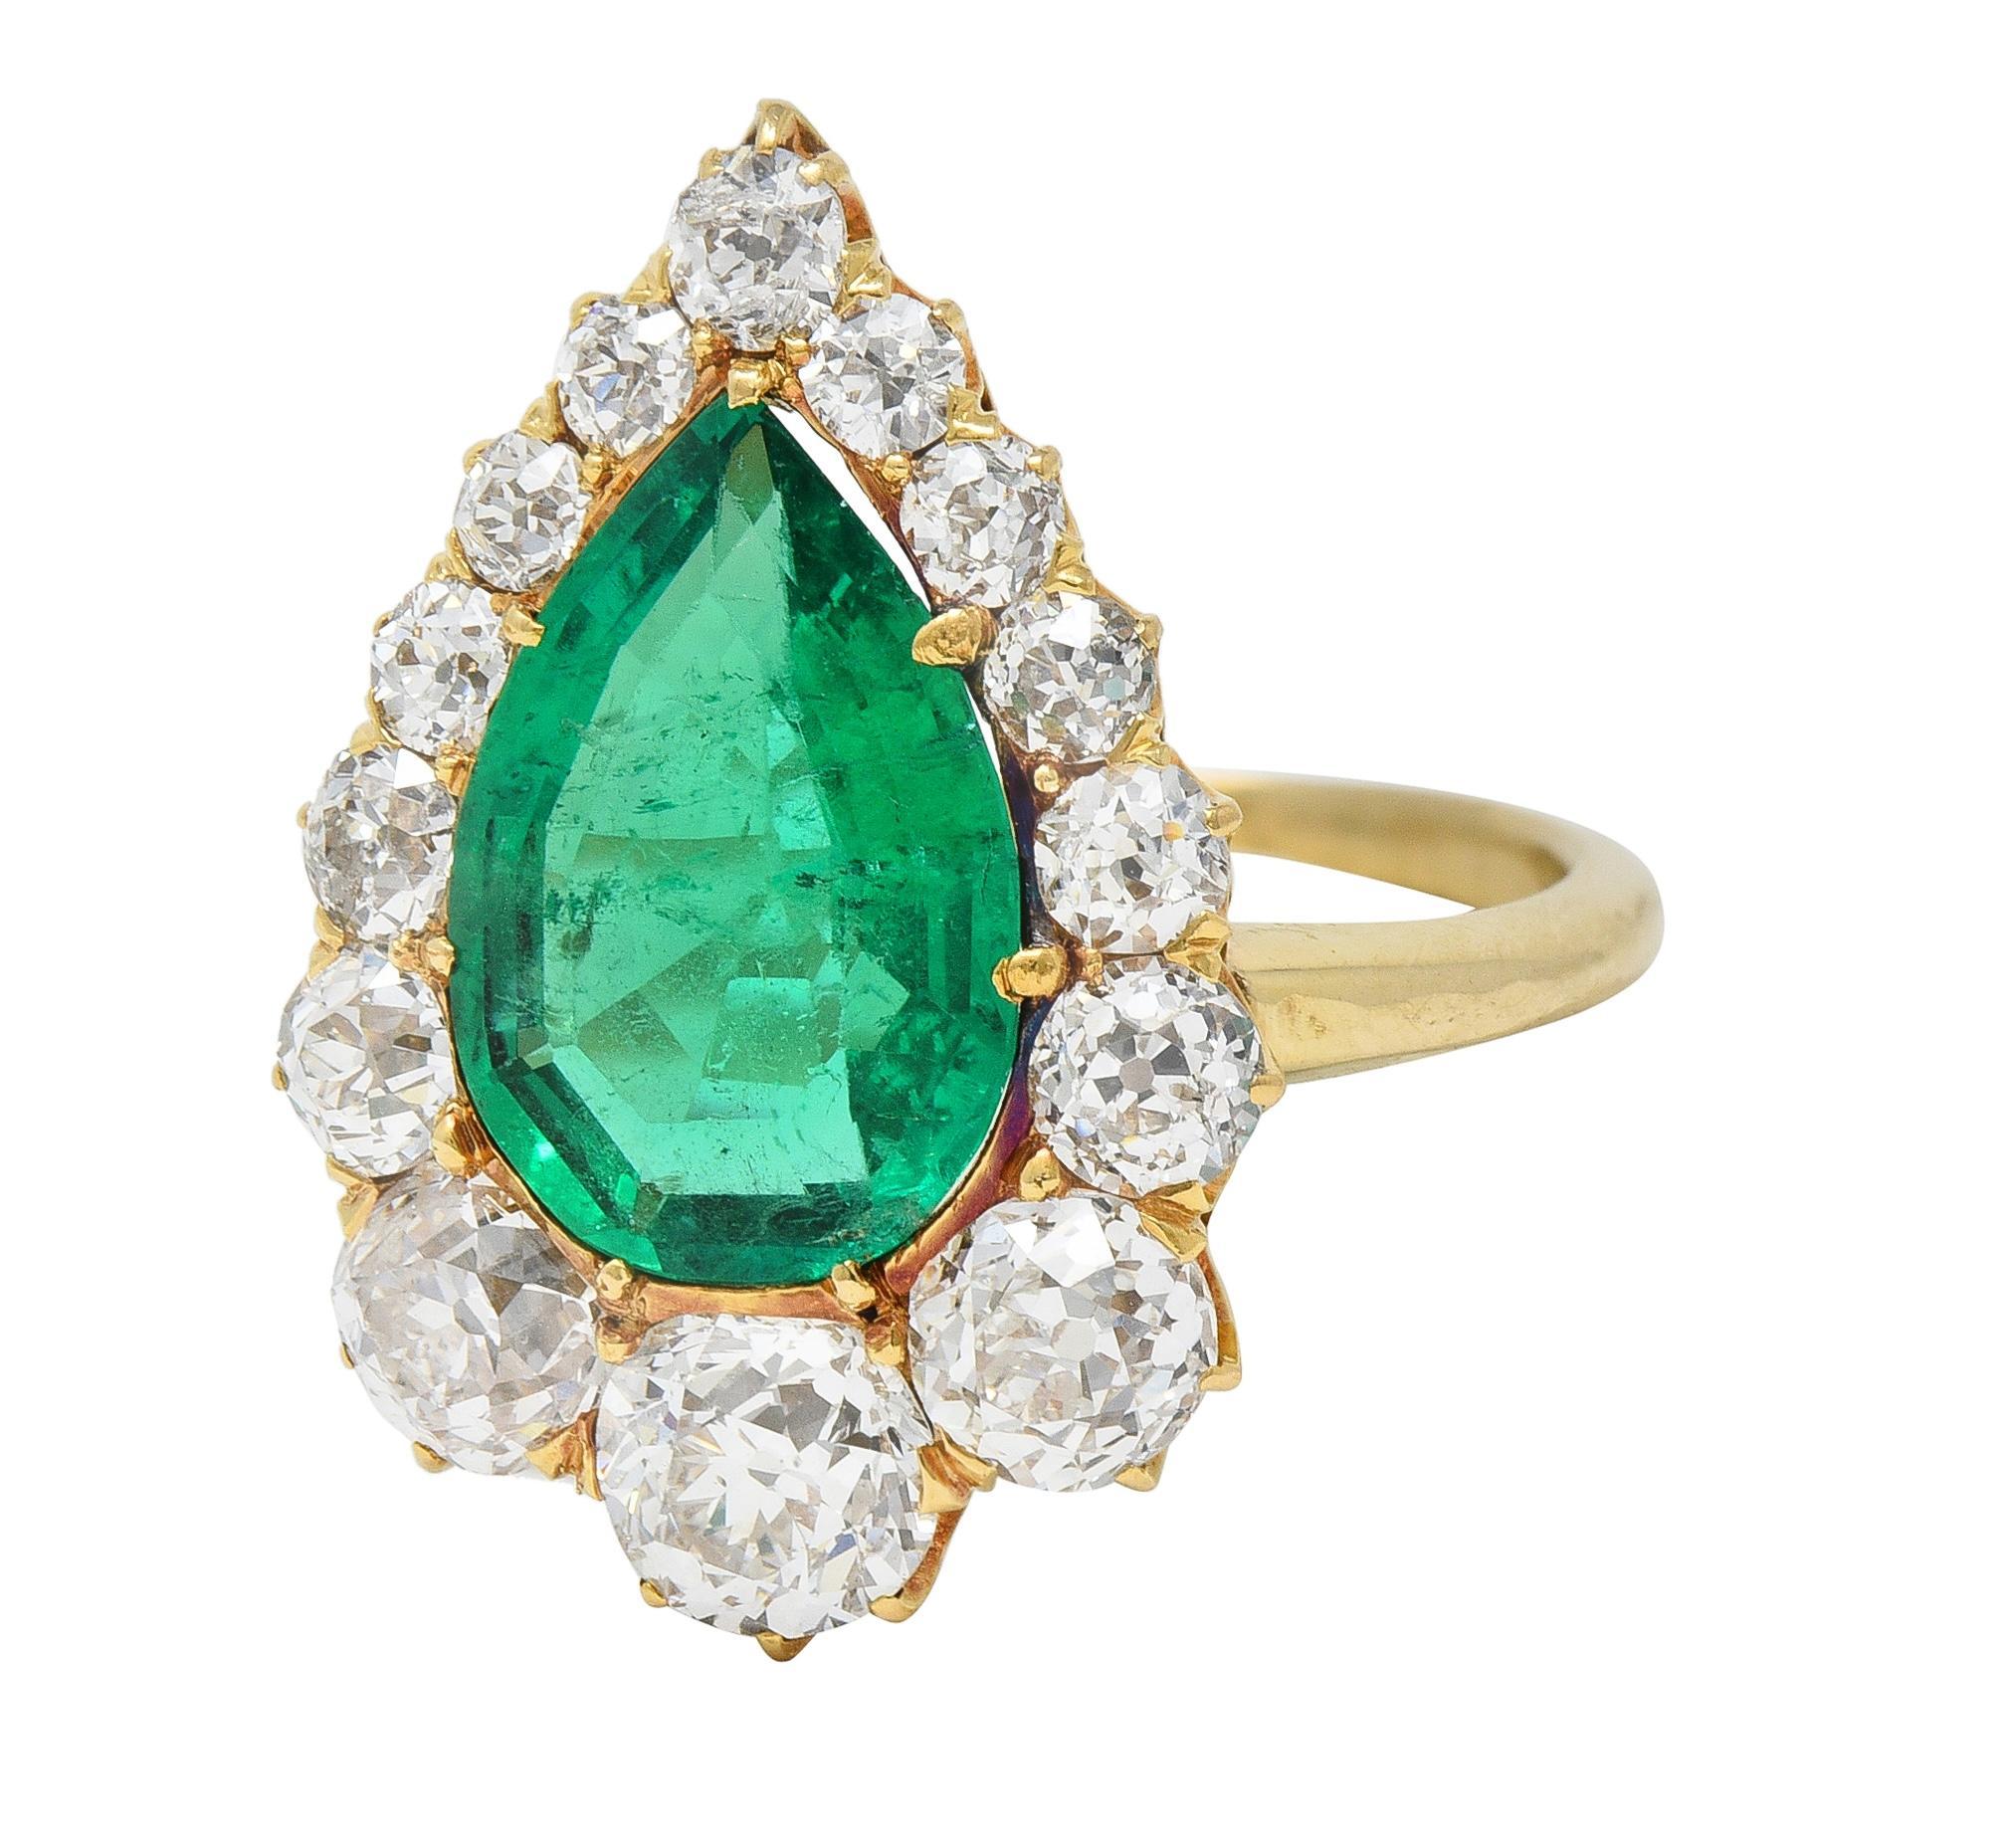 Late Victorian 5.34 CTW Pear Colombian Emerald Diamond 18 Karat Gold Ring AGL For Sale 1